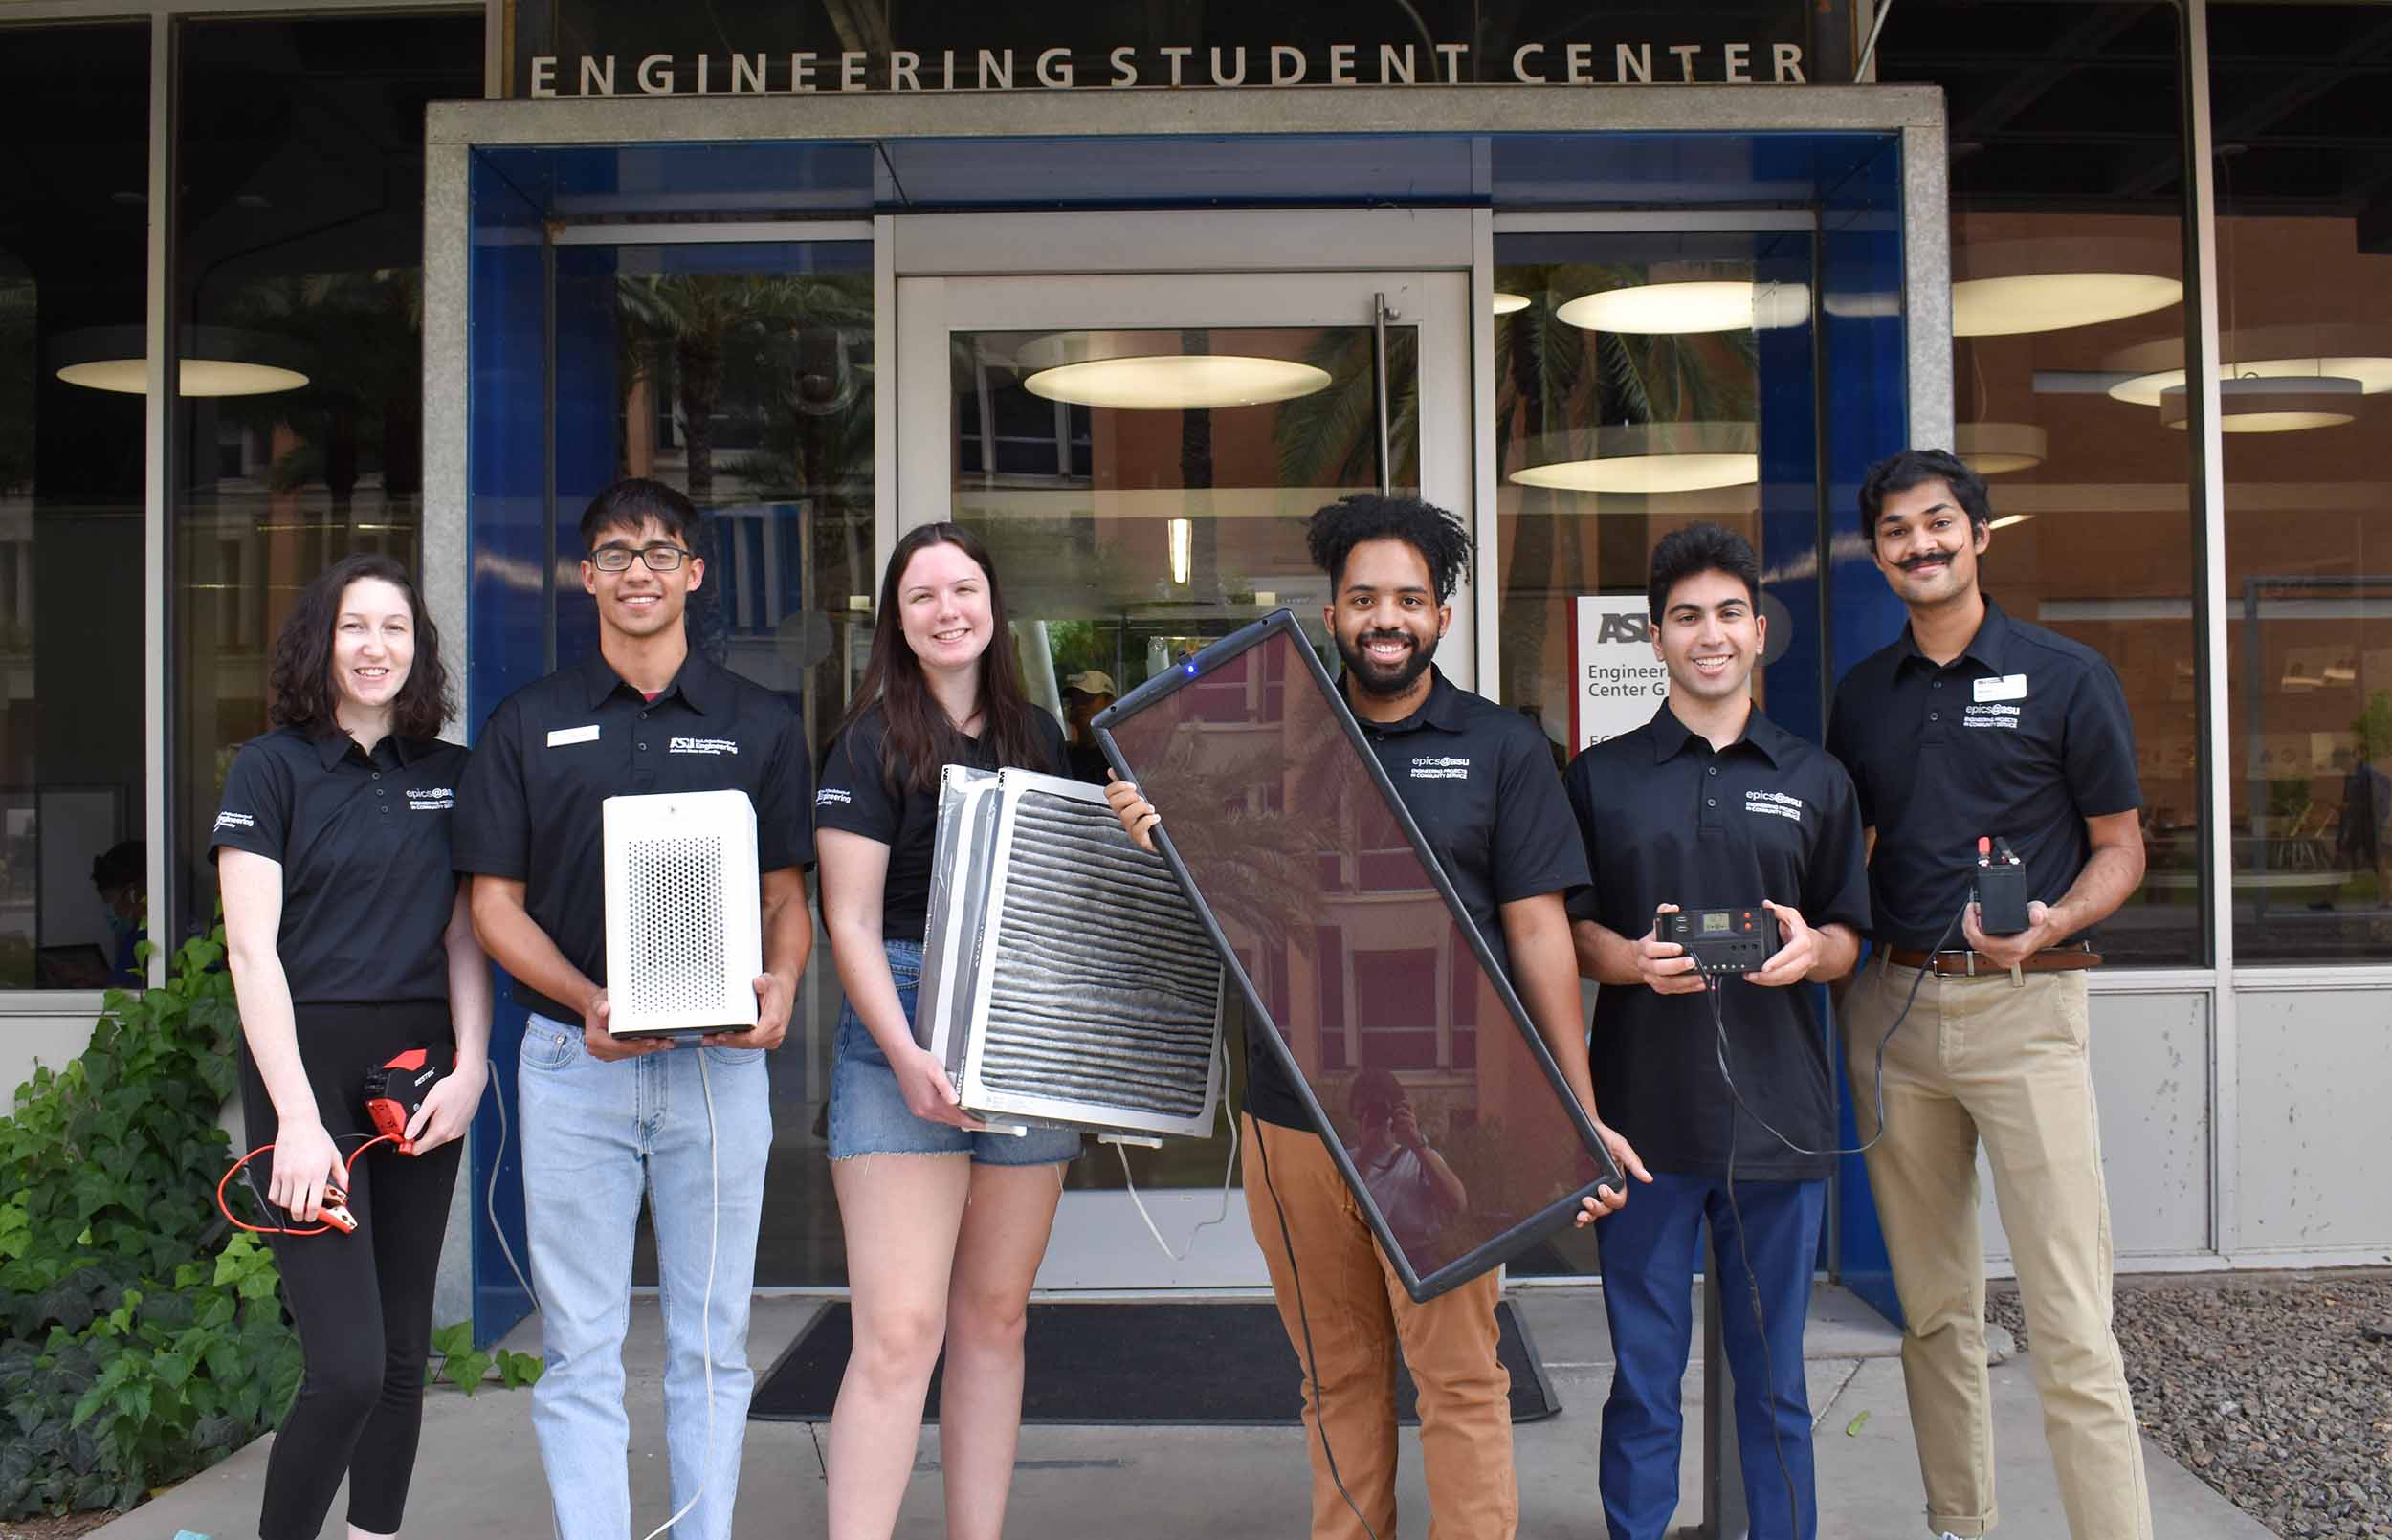 Six EPICS team members from Project Koyash pose for a group shot in front of the Engineering Student CEnter holding objects related to their projects